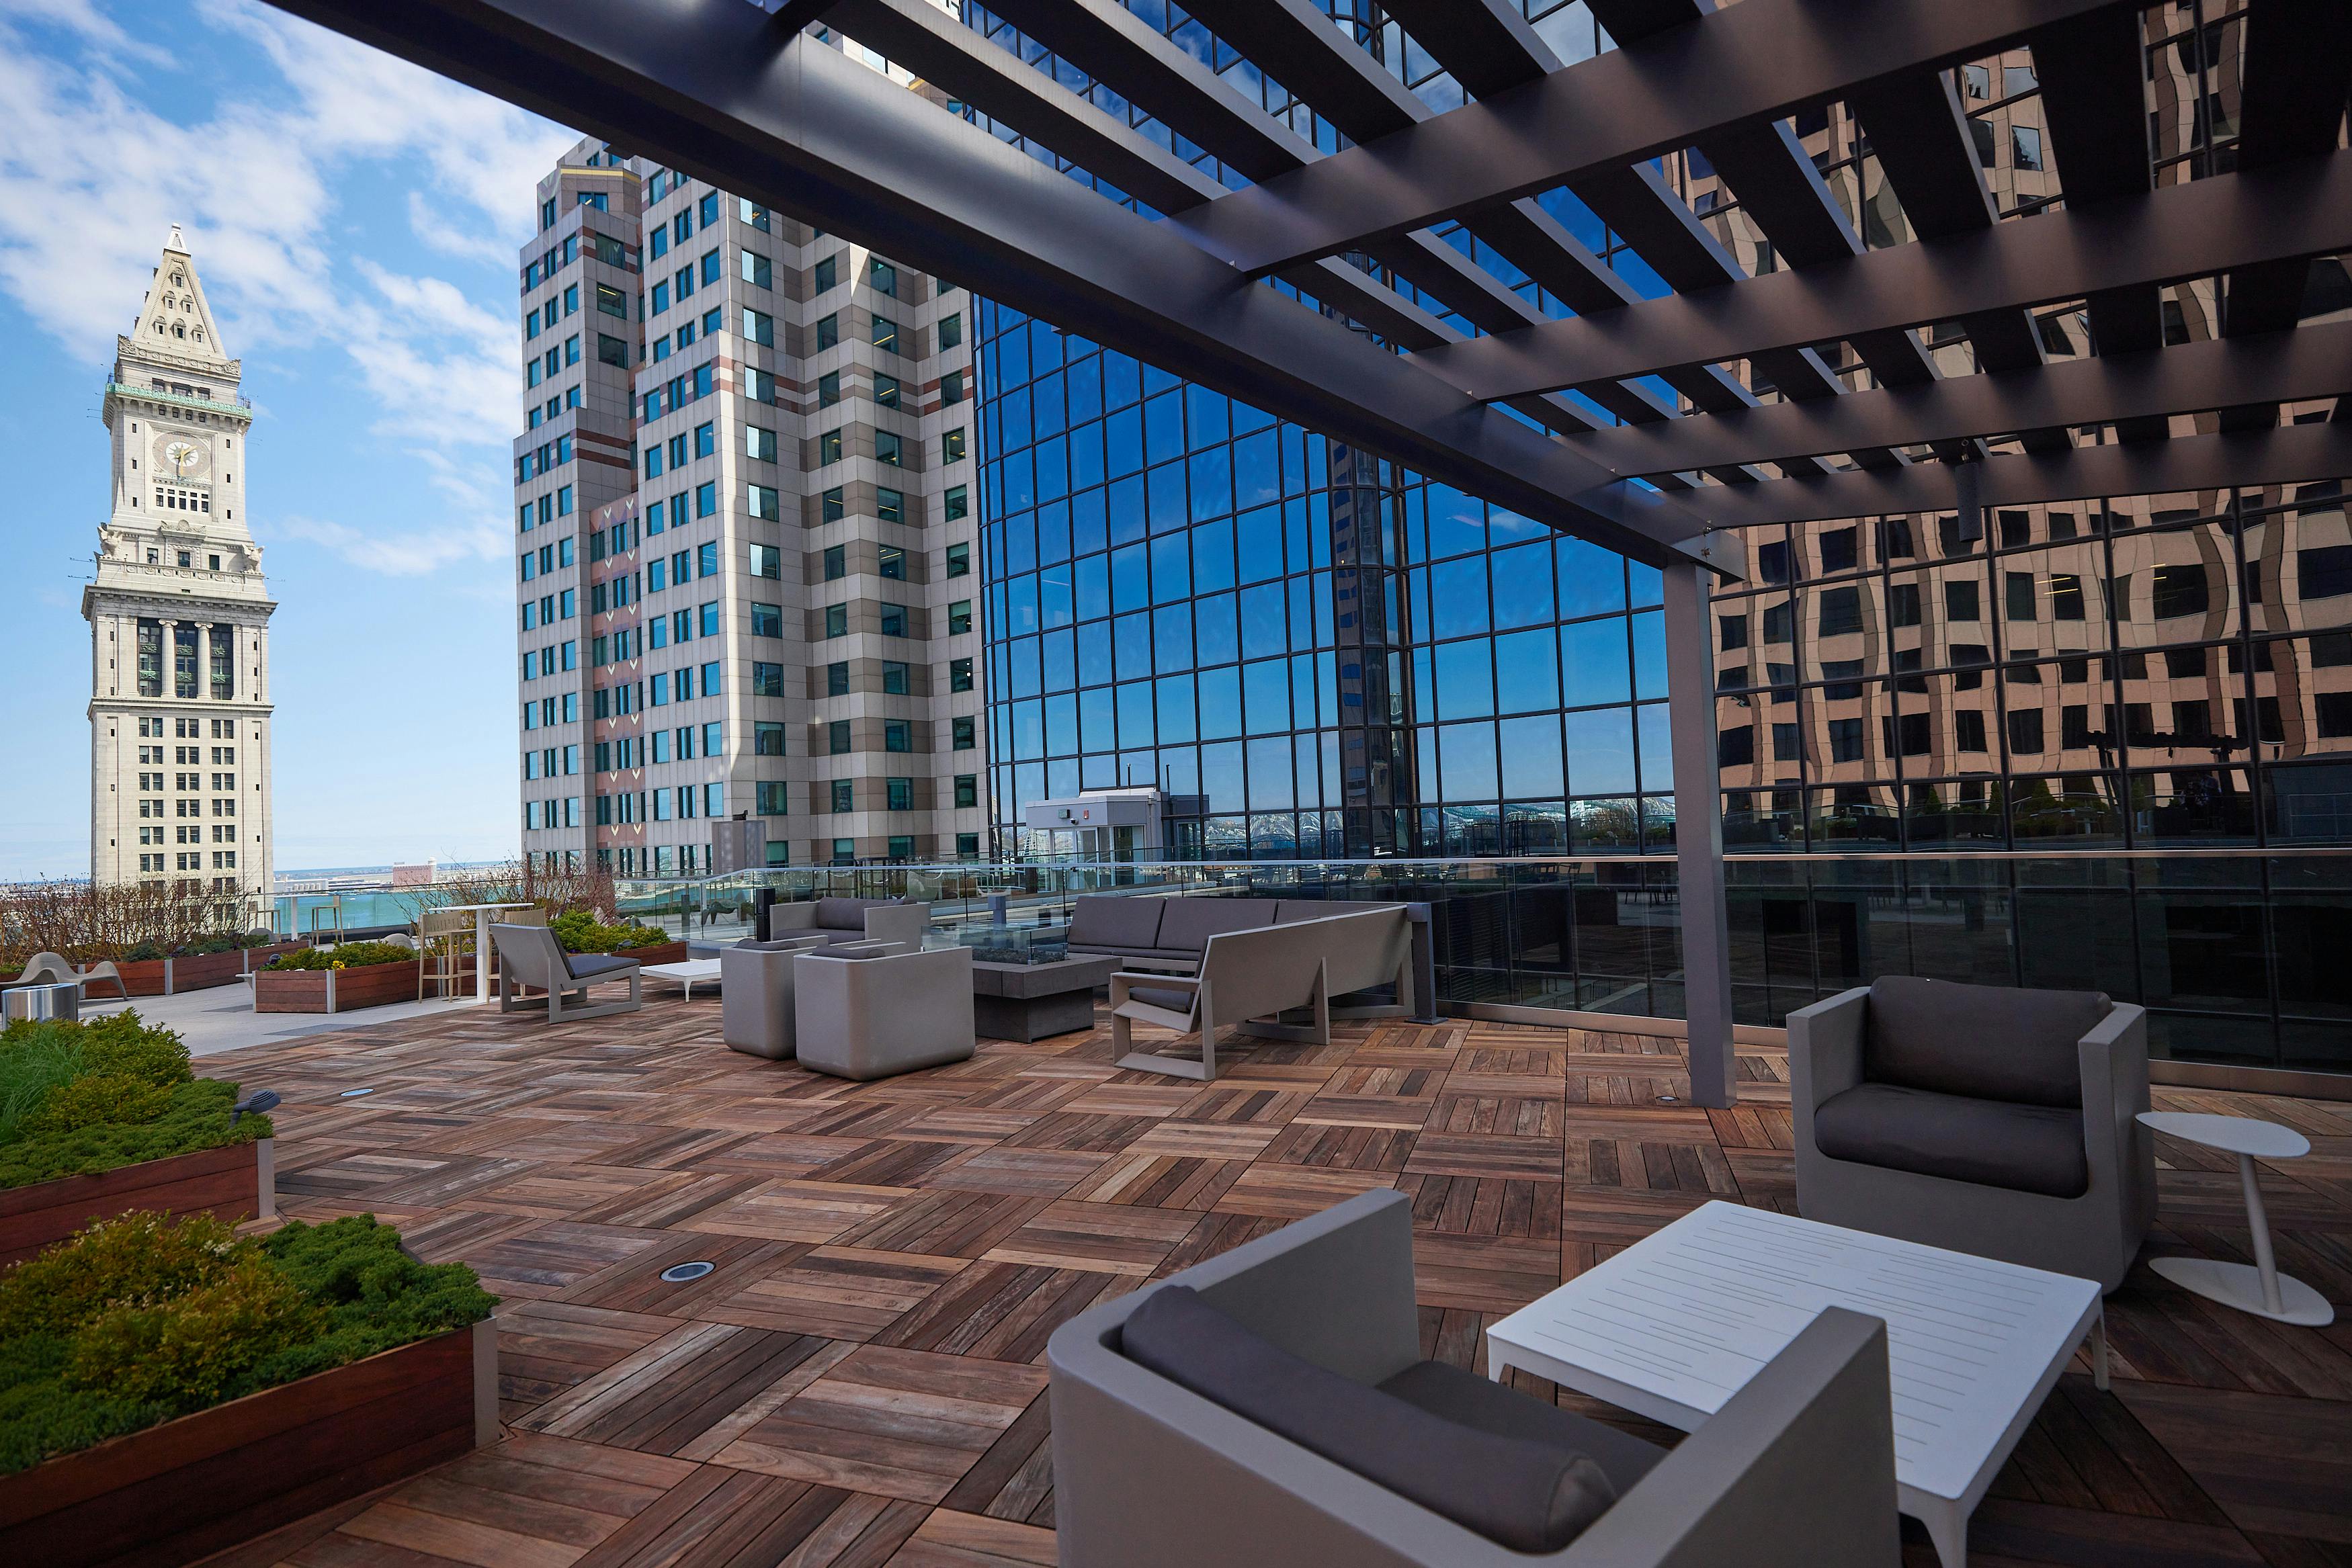 Nixon Peabody's Boston office rooftop lounge area, with wood-paneled floors, couches and easy chairs, and open-beam canopy, and long firepit coffee tables; the Boston Custom House Tower appears nearby beyond the edge of the rooftop